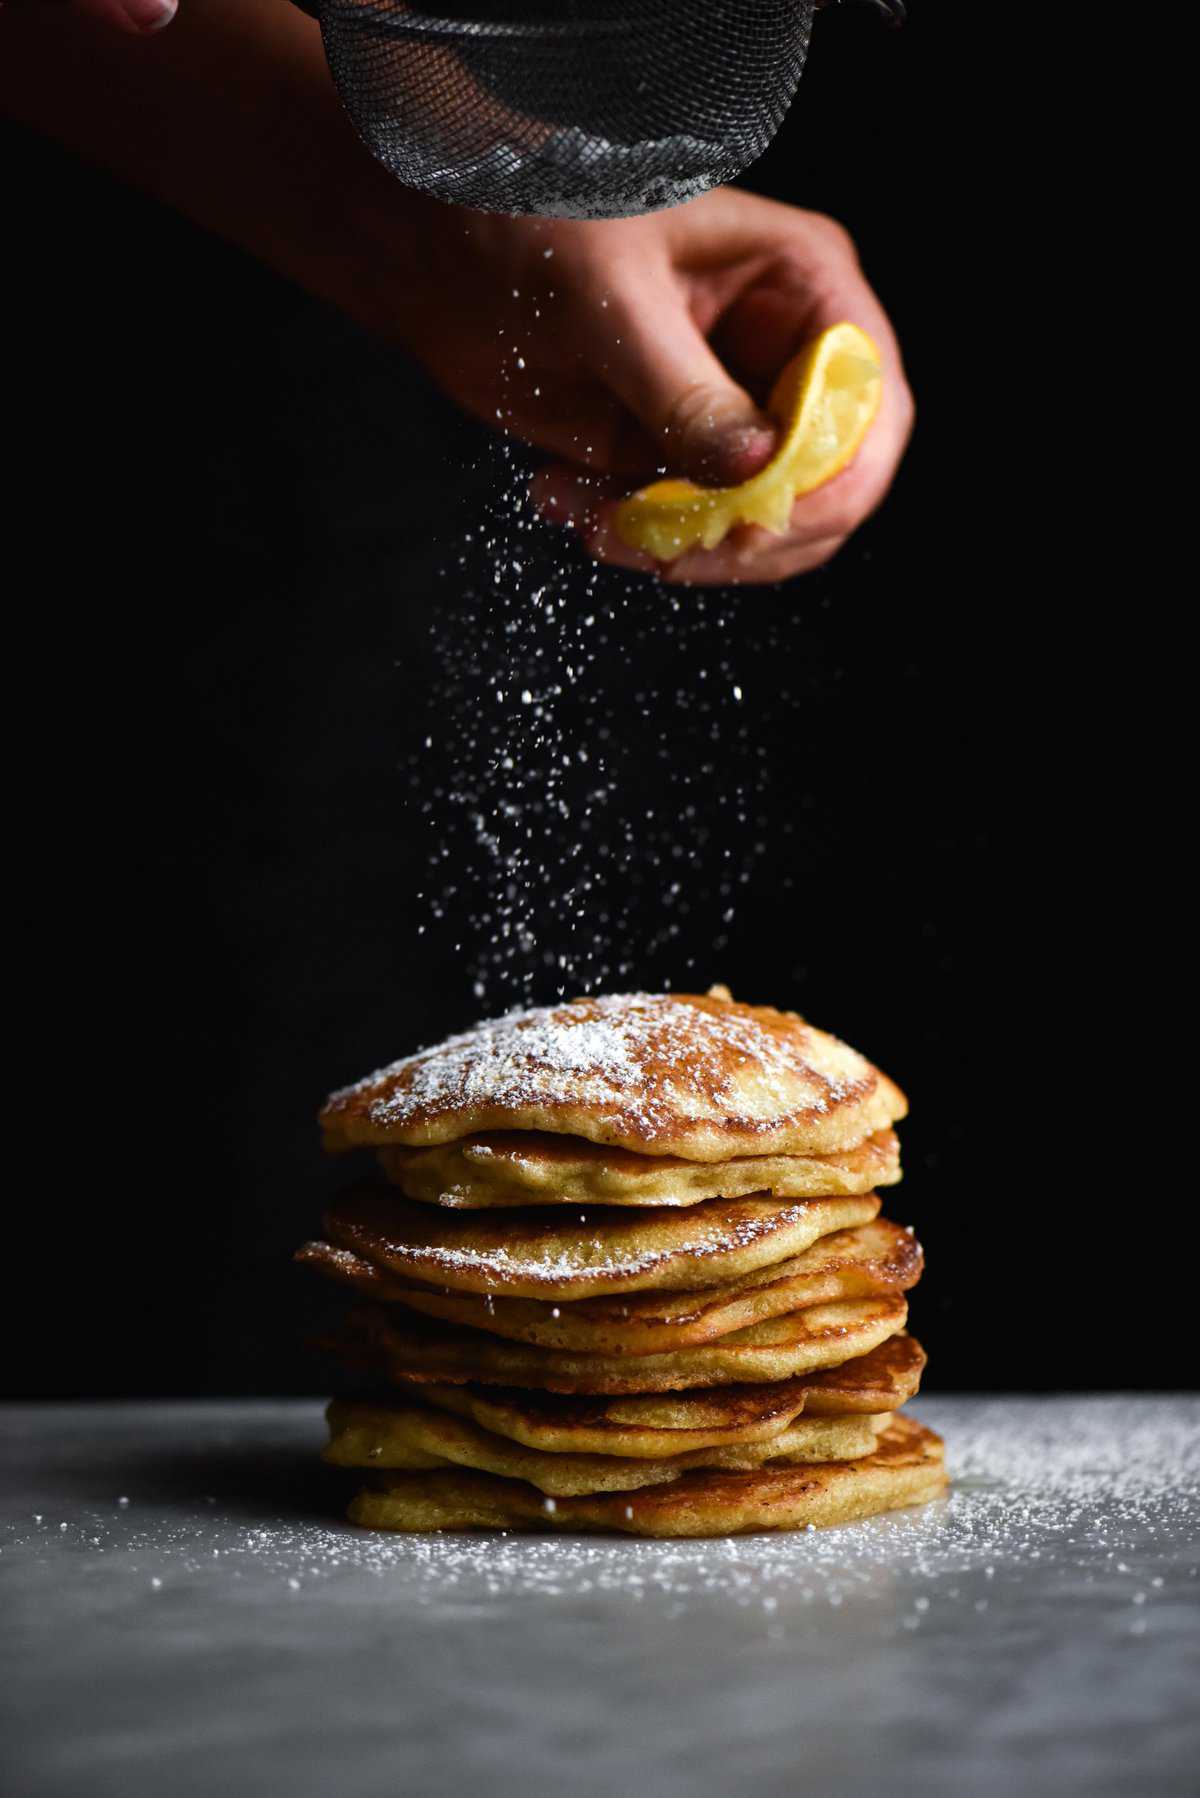 A side on view of a stack of gluten free sourdough pancakes being sprinkled with lemon juice and icing sugar against a dark backdrop